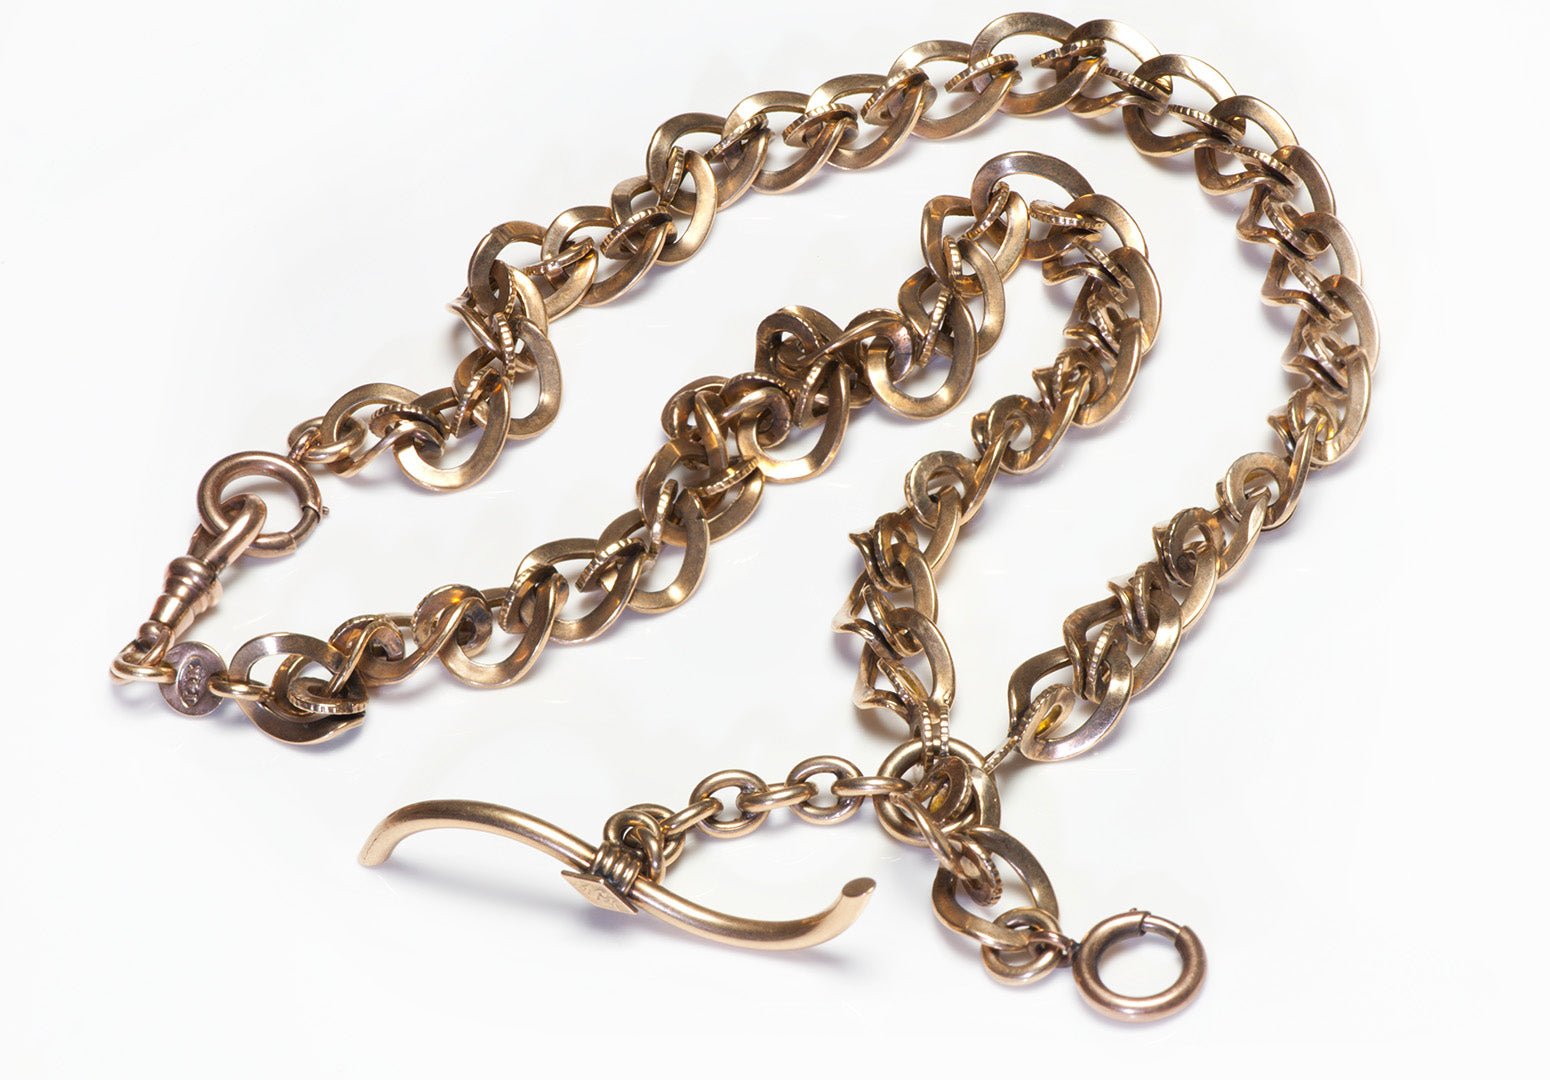 Antique Gold Large Ornate Link Fob Watch Chain